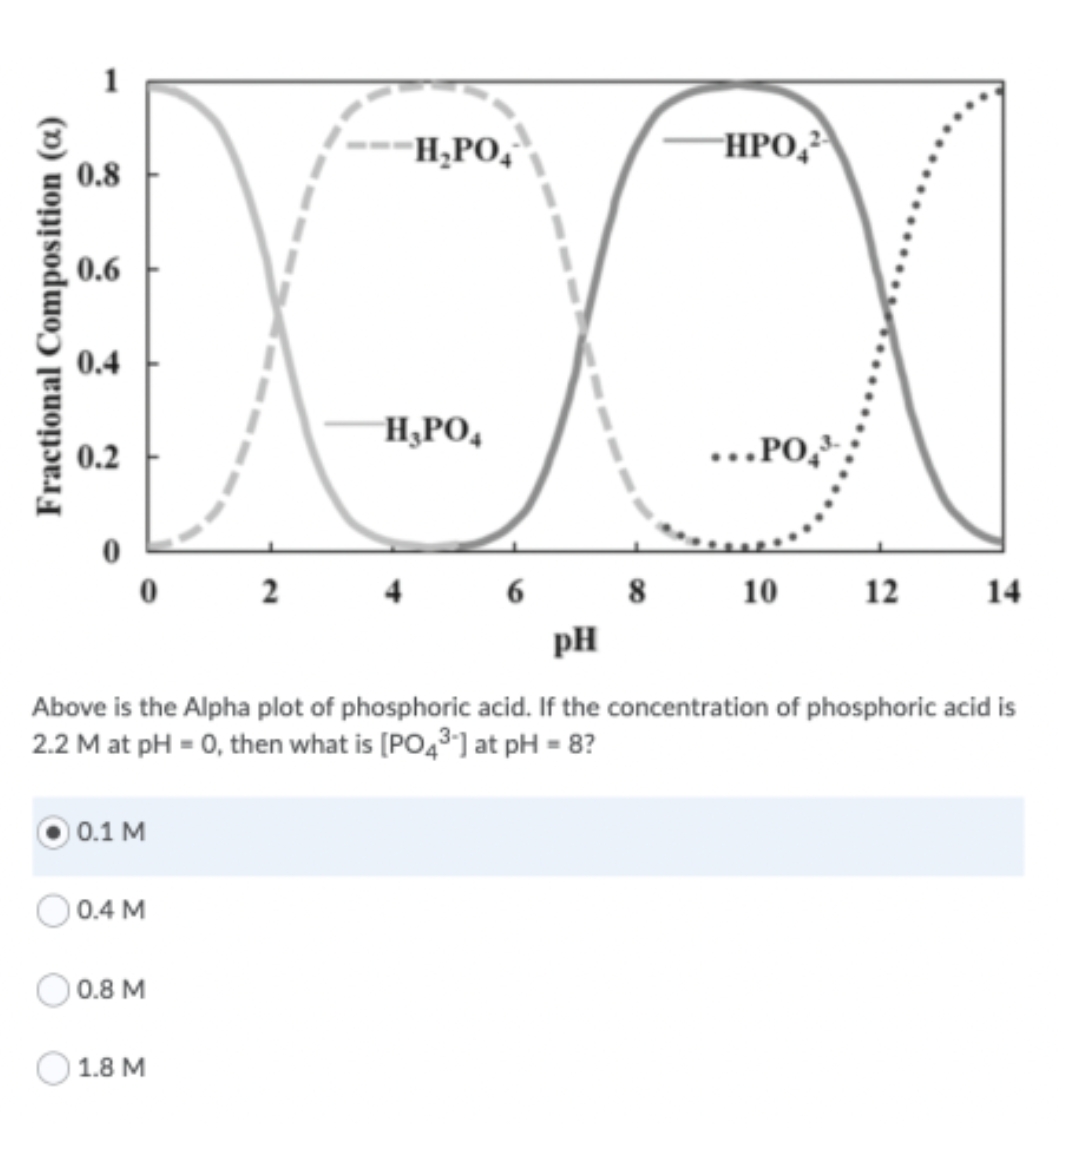 H,PO,
HPO,2
0.8
0.6
0.4
H,PO,
0.2
...PO,
2
6
8
10
12
14
pH
Above is the Alpha plot of phosphoric acid. If the concentration of phosphoric acid is
2.2 M at pH = 0, then what is [PO43"] at pH = 8?
0.1 M
0.4 M
0.8 M
1.8 M
Fractional Composition (a)
